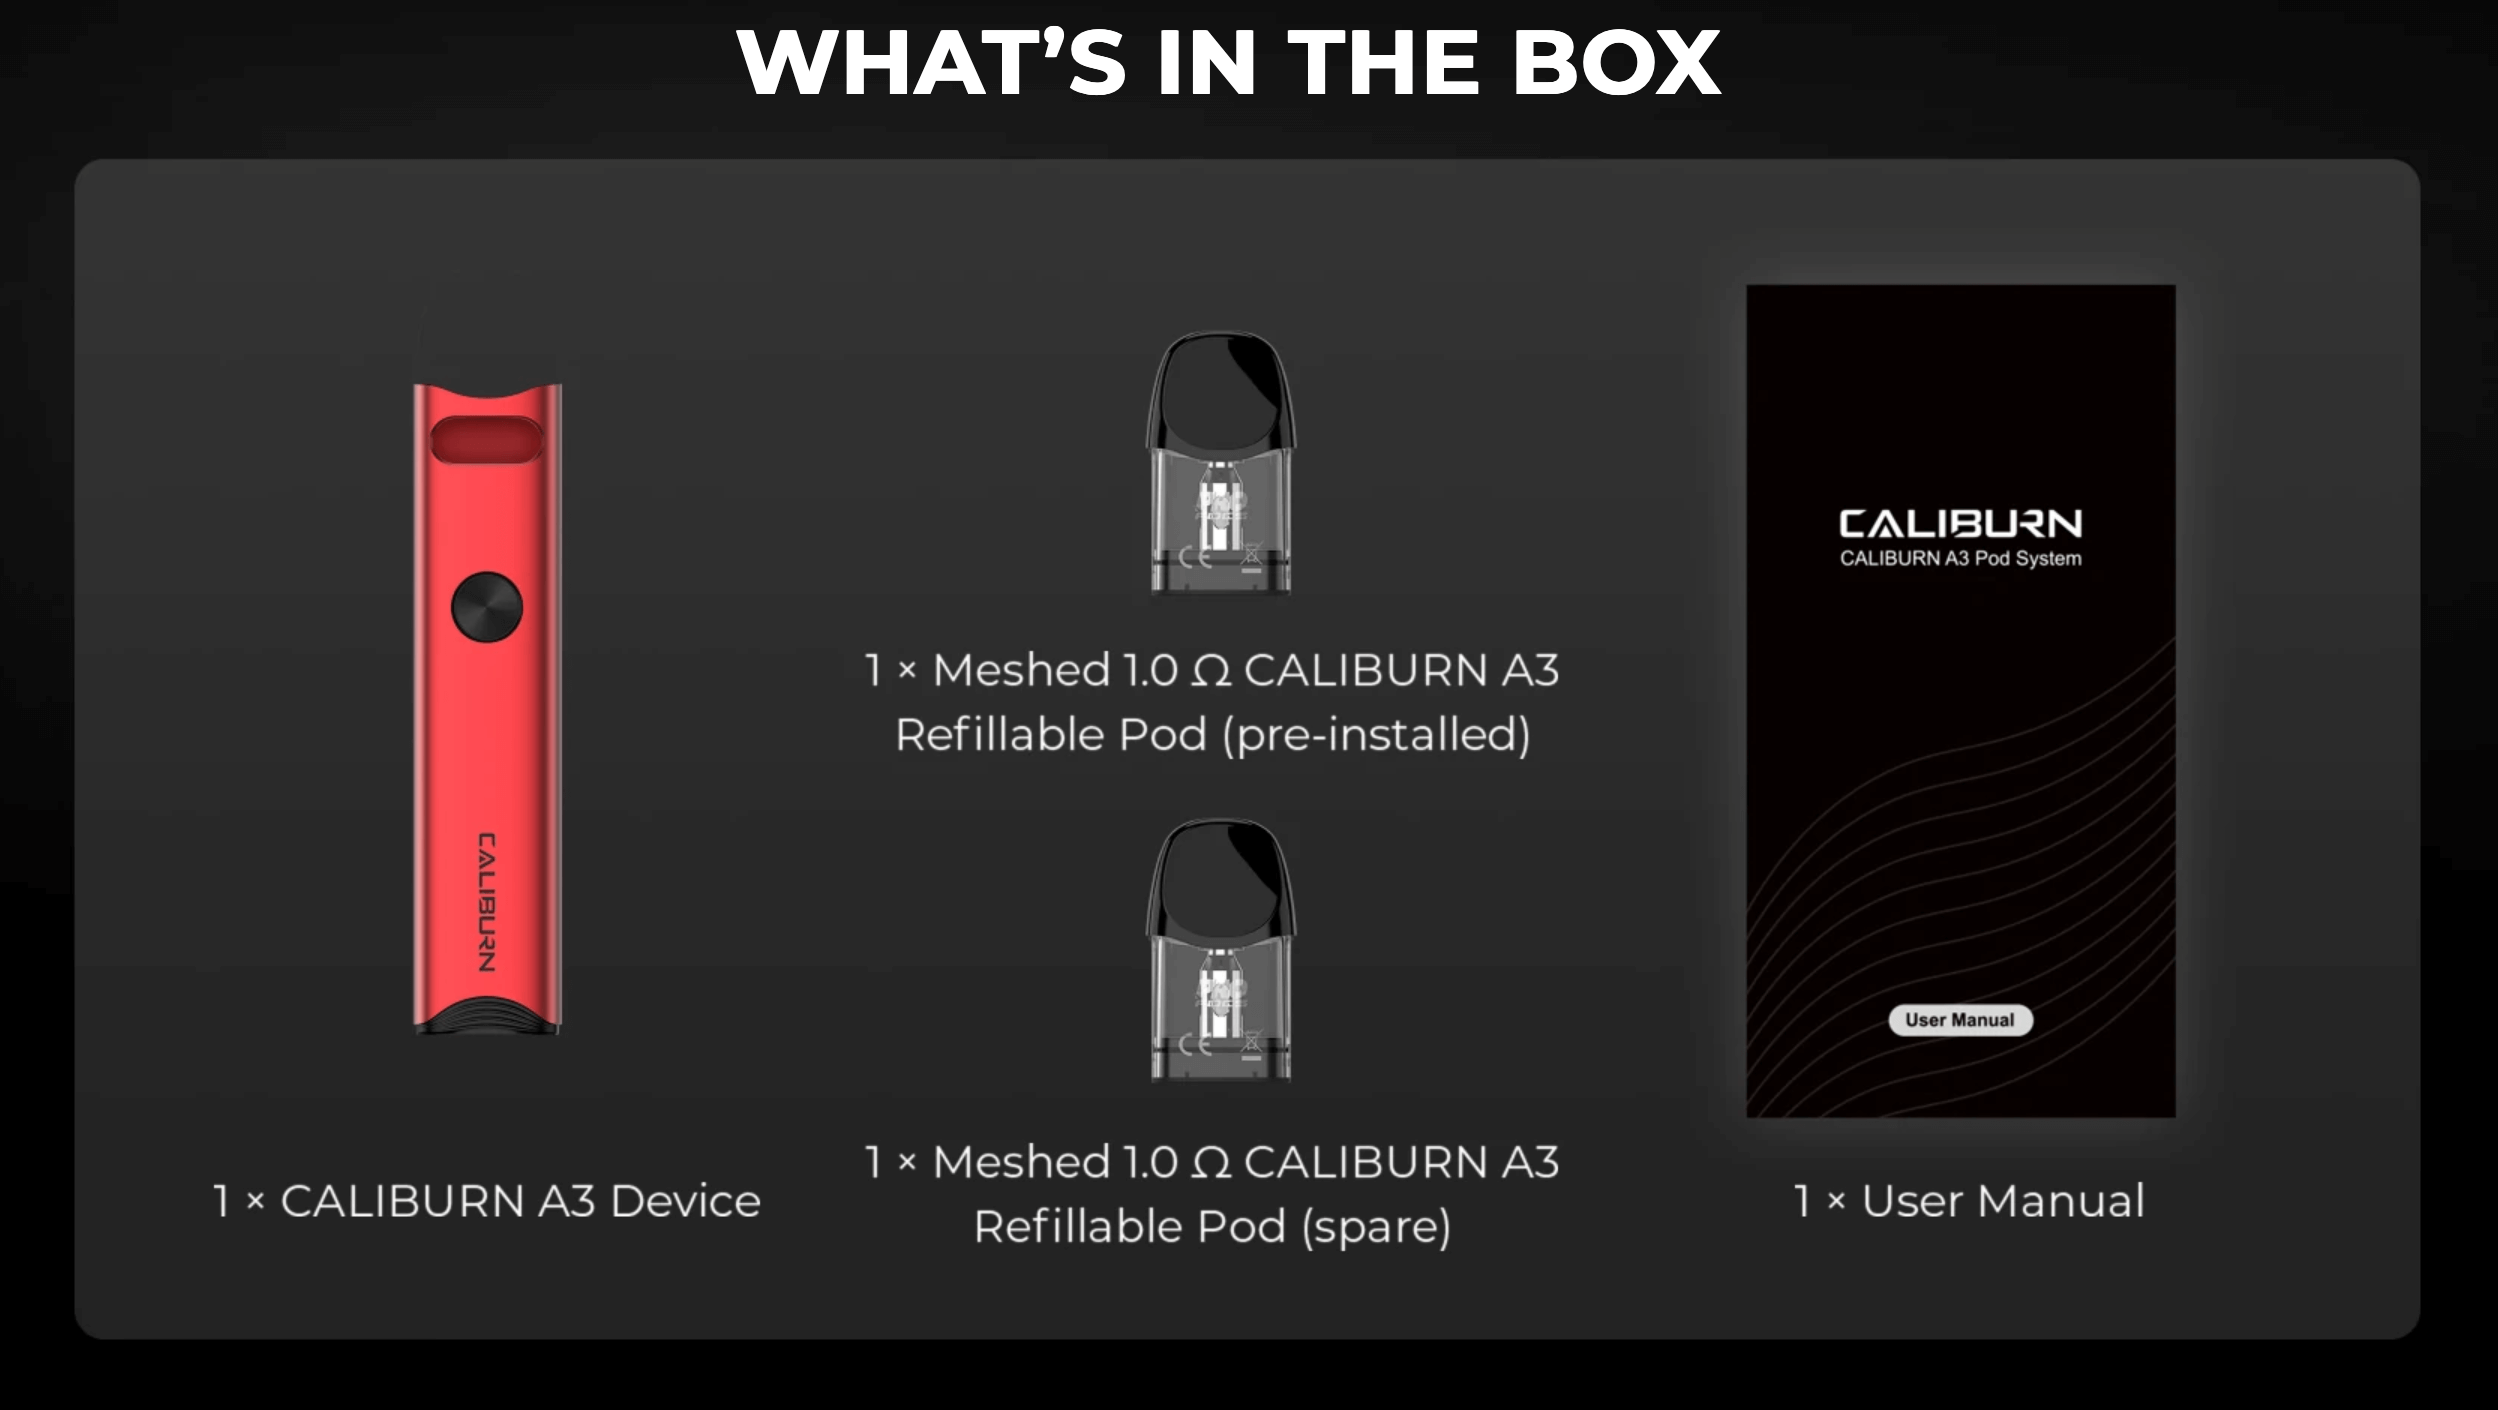 Uwell Caliburn A3 | What's in the box? | device, 2 x pods, 1 x user manual